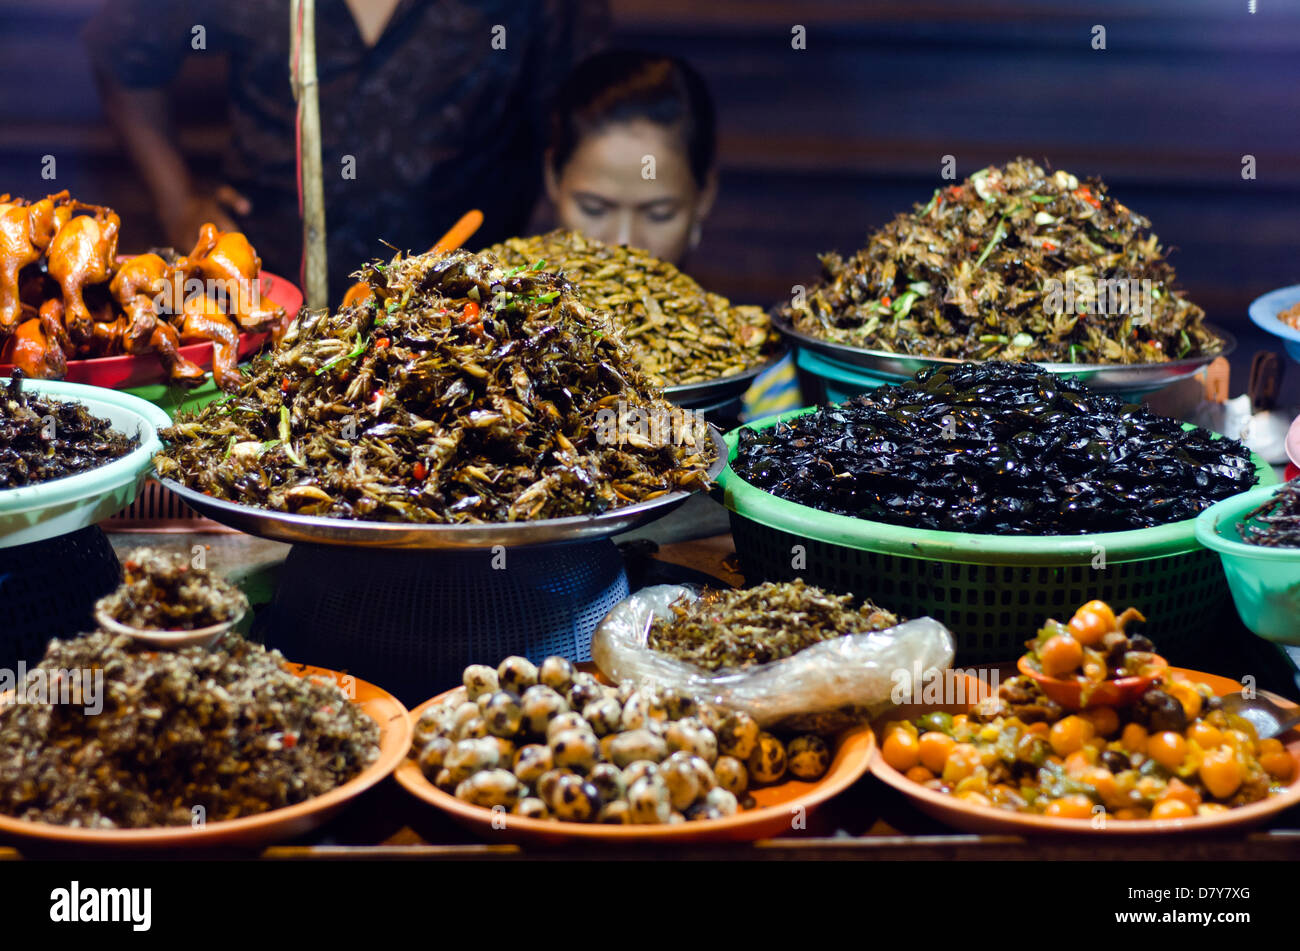 Vendor selling insects at Riverside,Phnom Penh,Cambodia Stock Photo